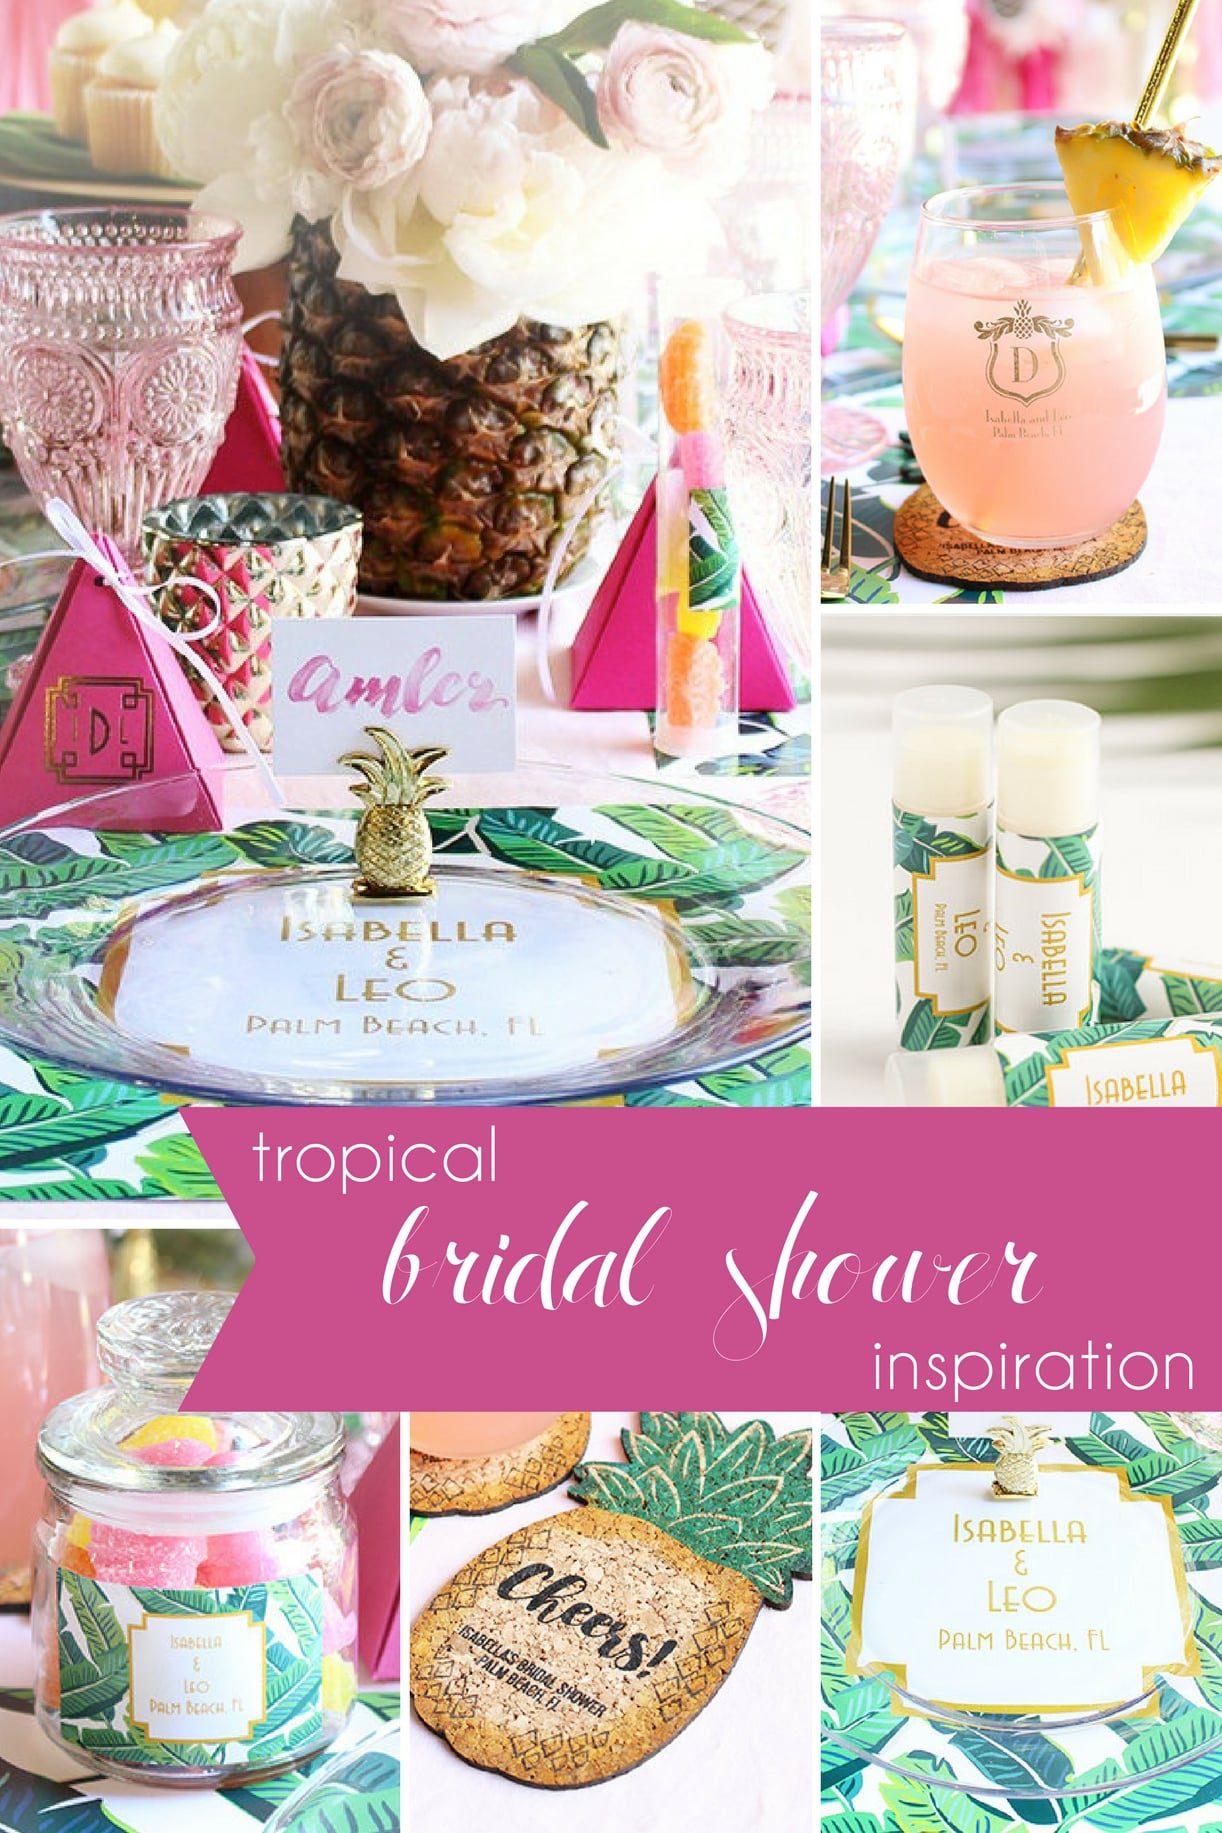 Tropical Bridal Shower as seen on Hill City Bride Wedding Blog - favors, pineapple, placemats, ideas, pink, green